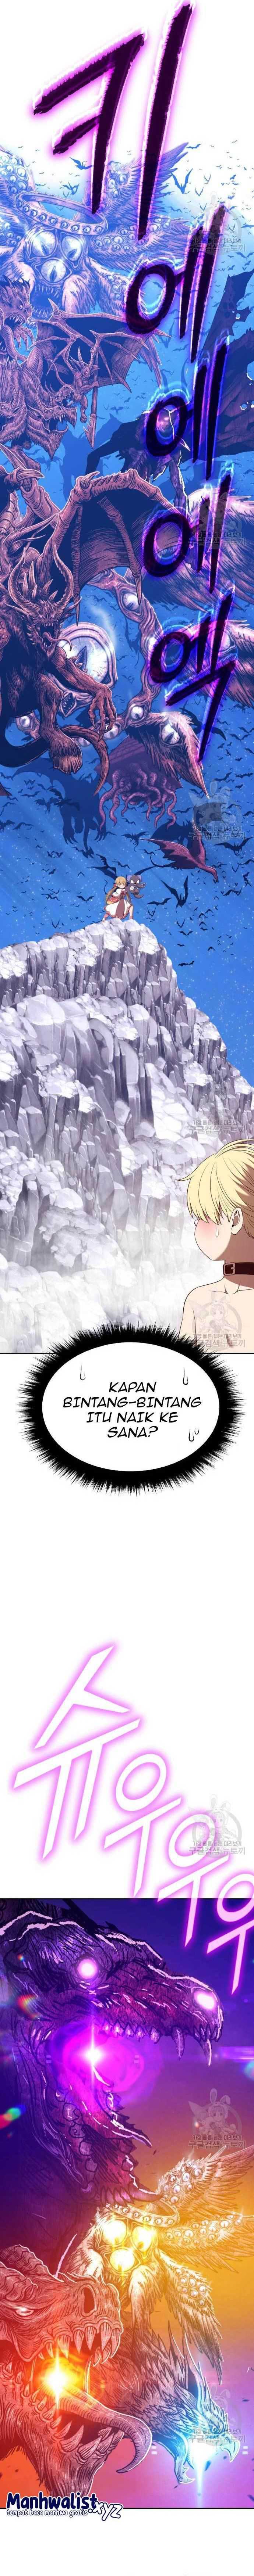 +99 Wooden Stick Chapter 77 Image 20